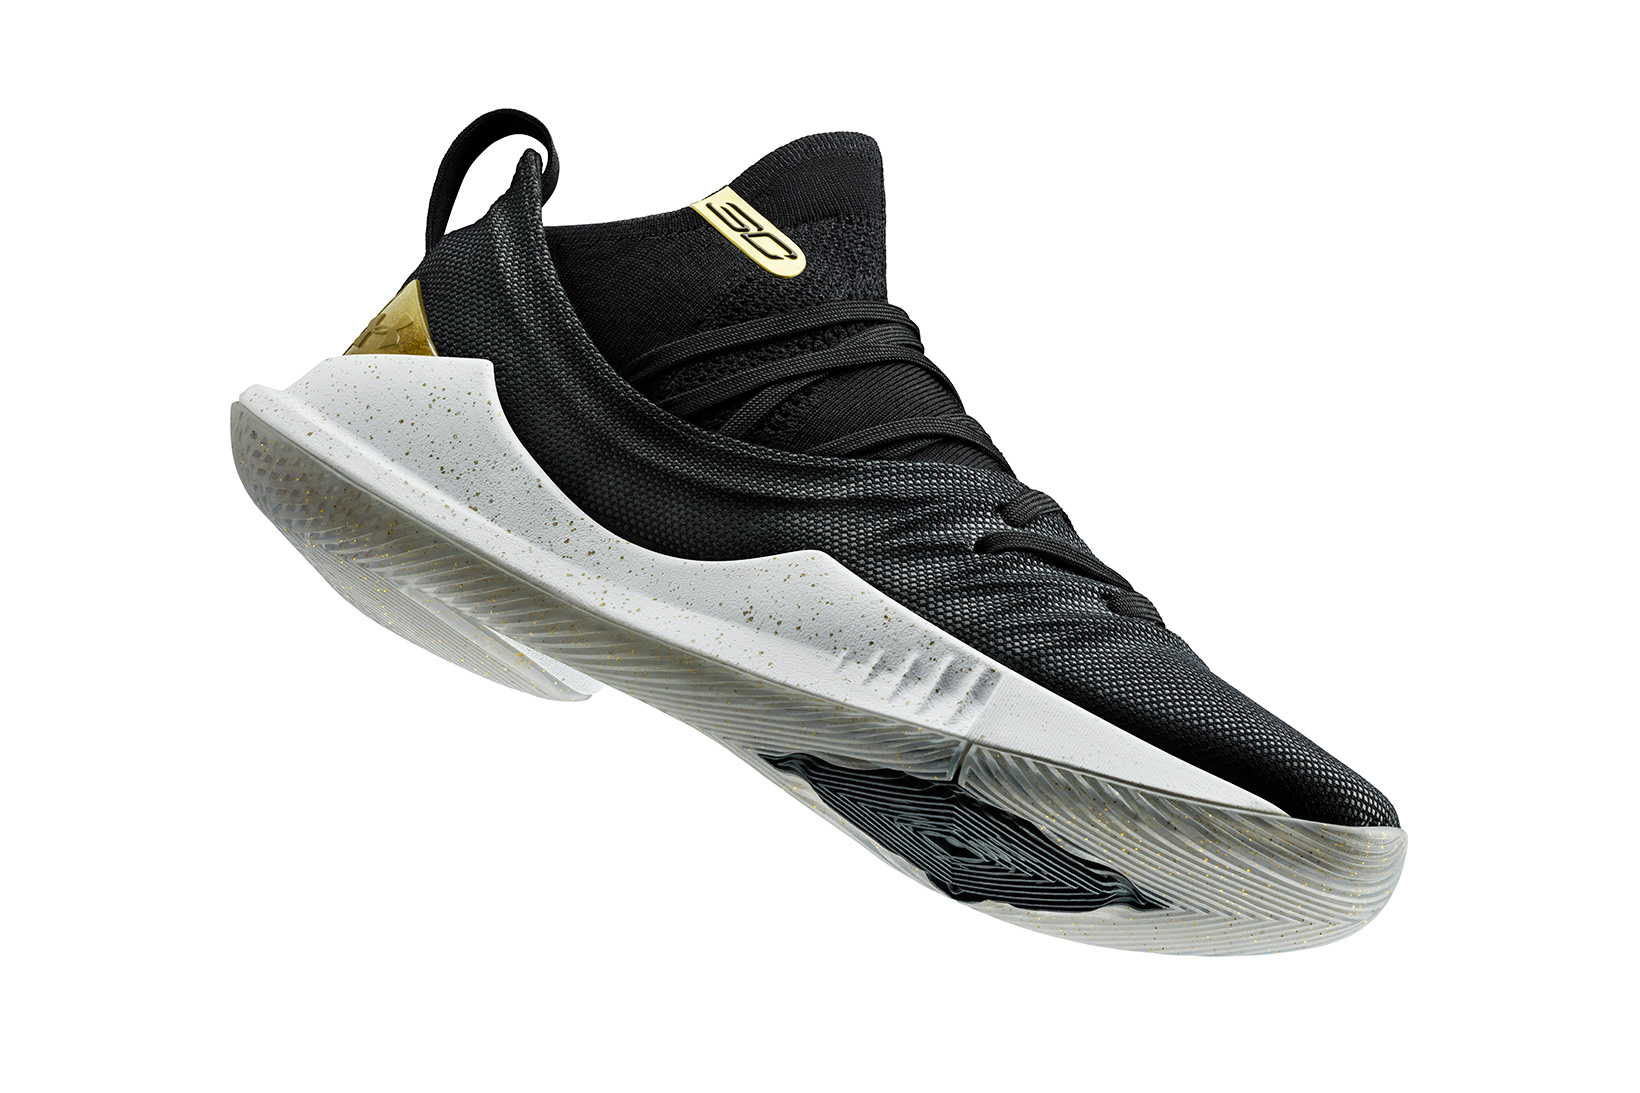 curry 5 black and white